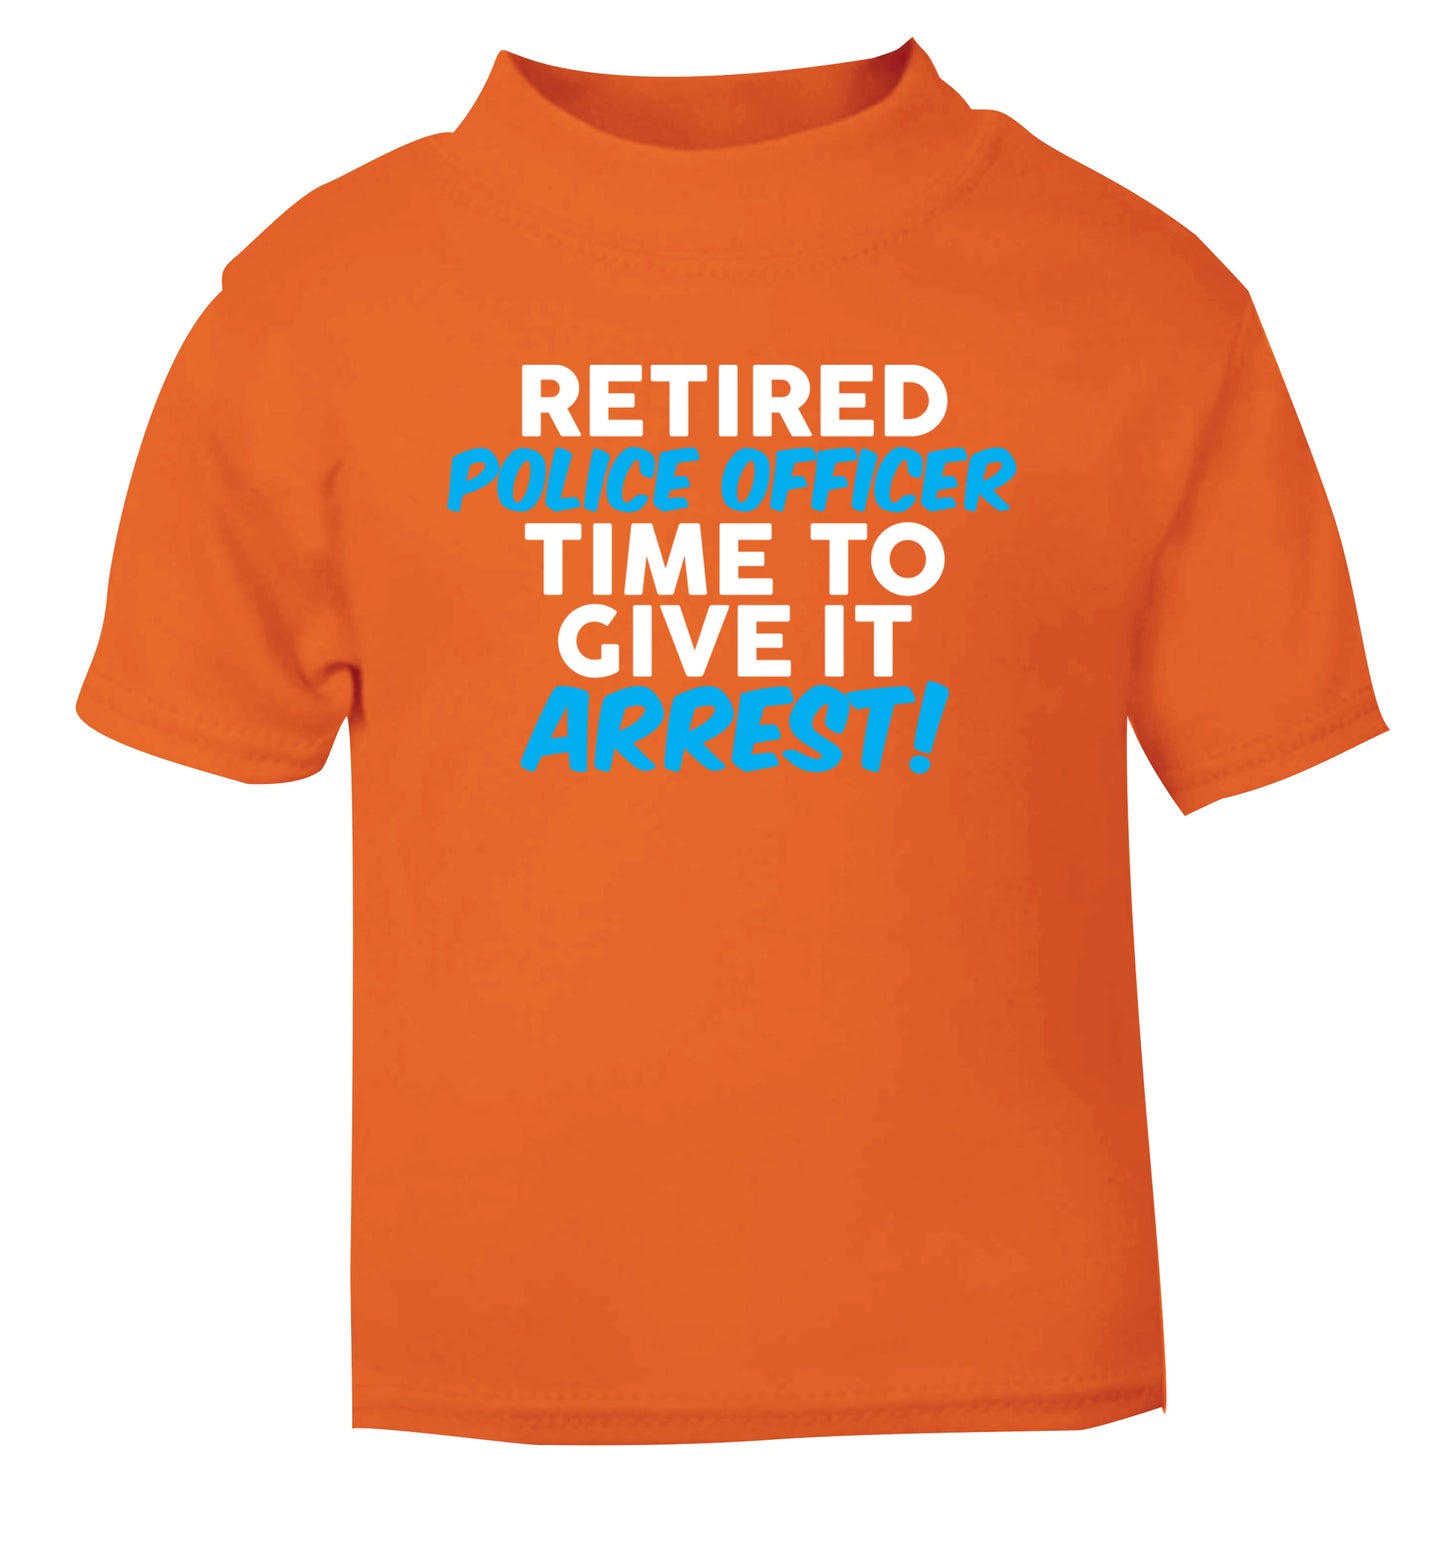 Retired police officer time to give it arrest orange Baby Toddler Tshirt 2 Years